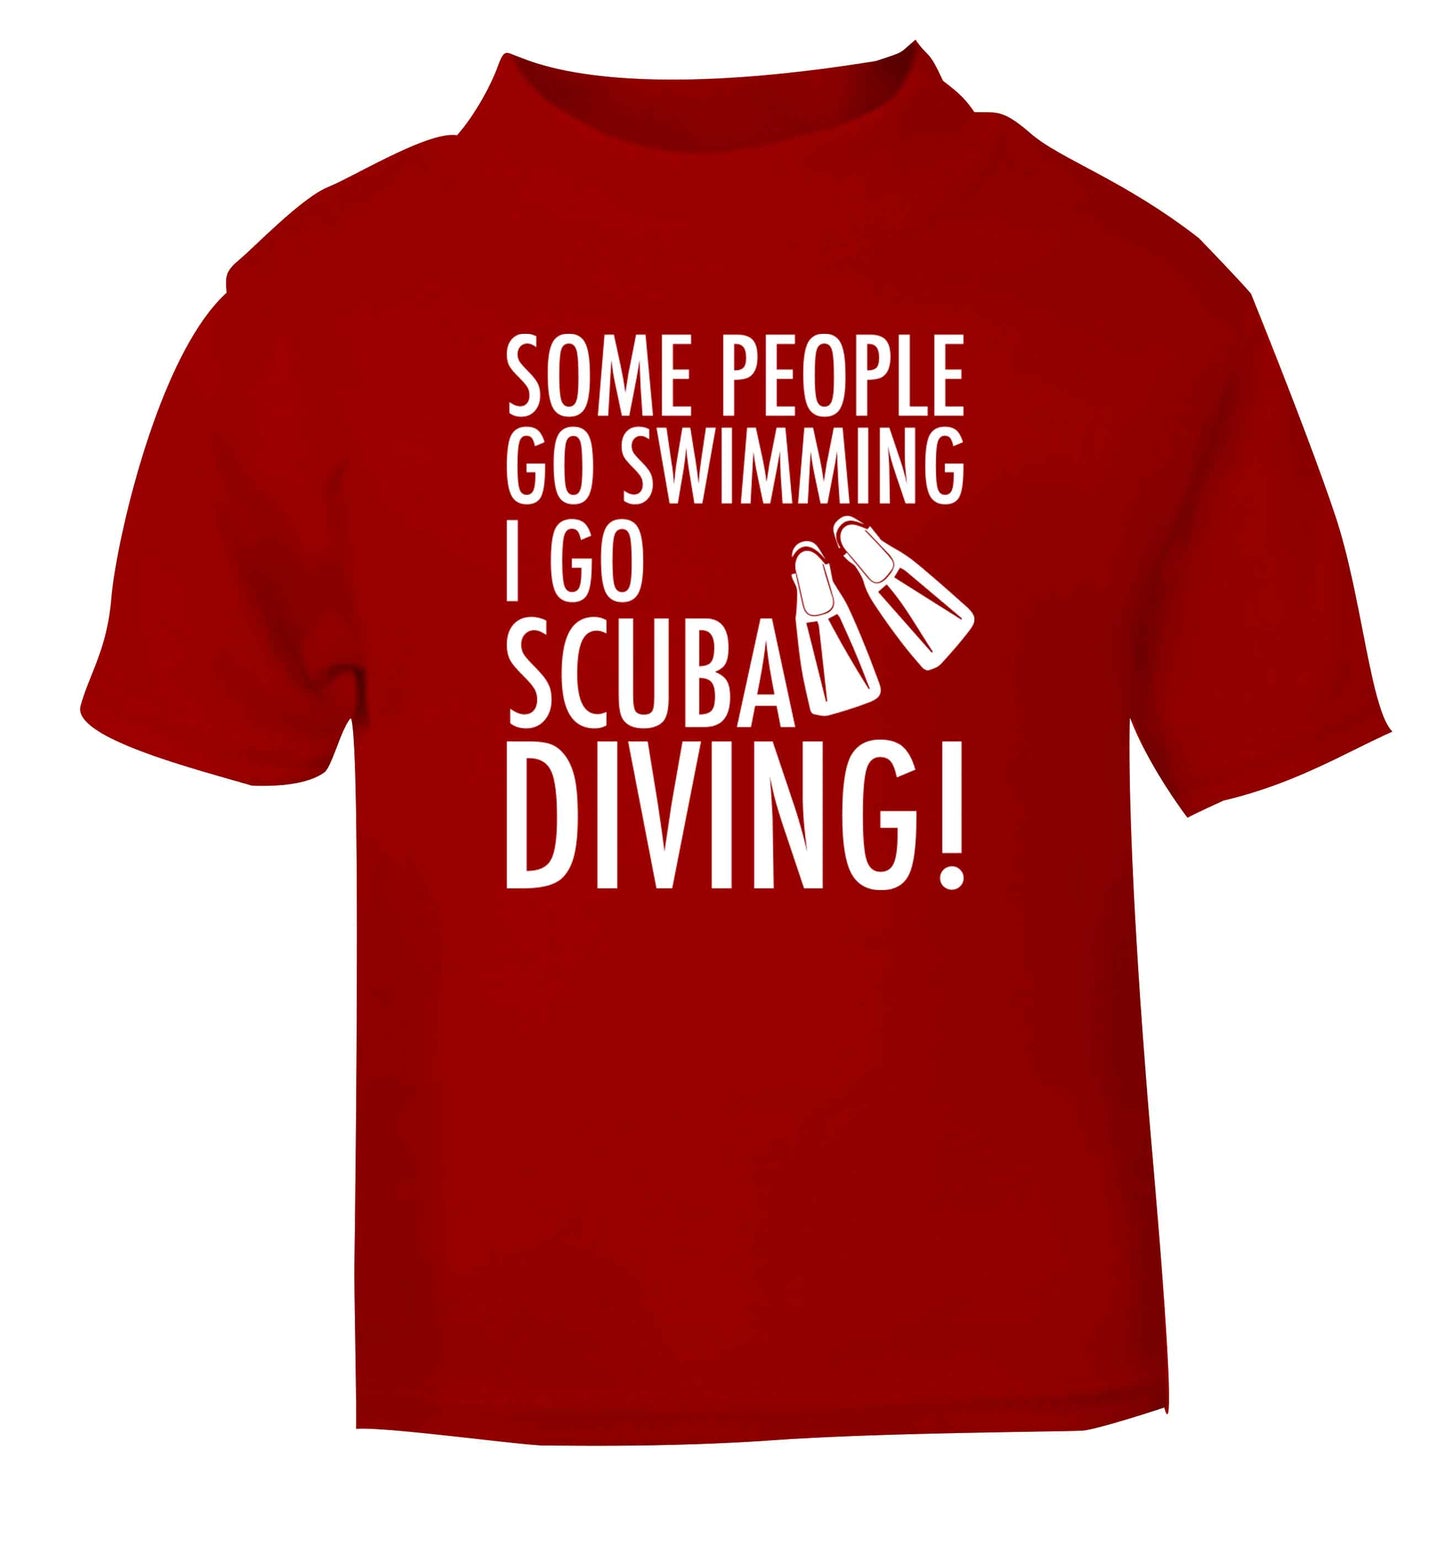 Some people go swimming I go scuba diving! red Baby Toddler Tshirt 2 Years